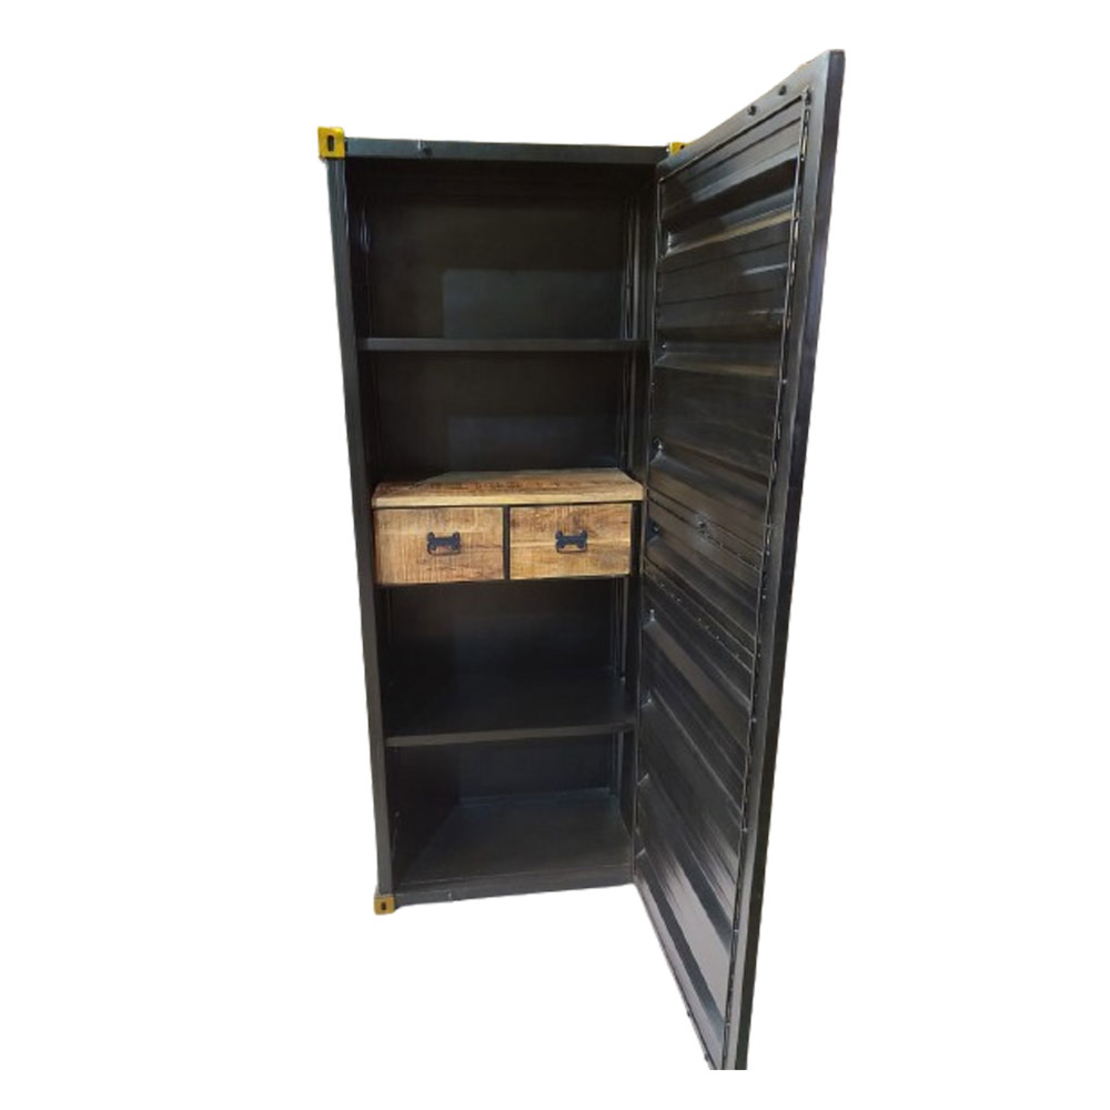 CONTAINER BOOKCASE TALL METAL BLACK GOLD RUSTY 61x